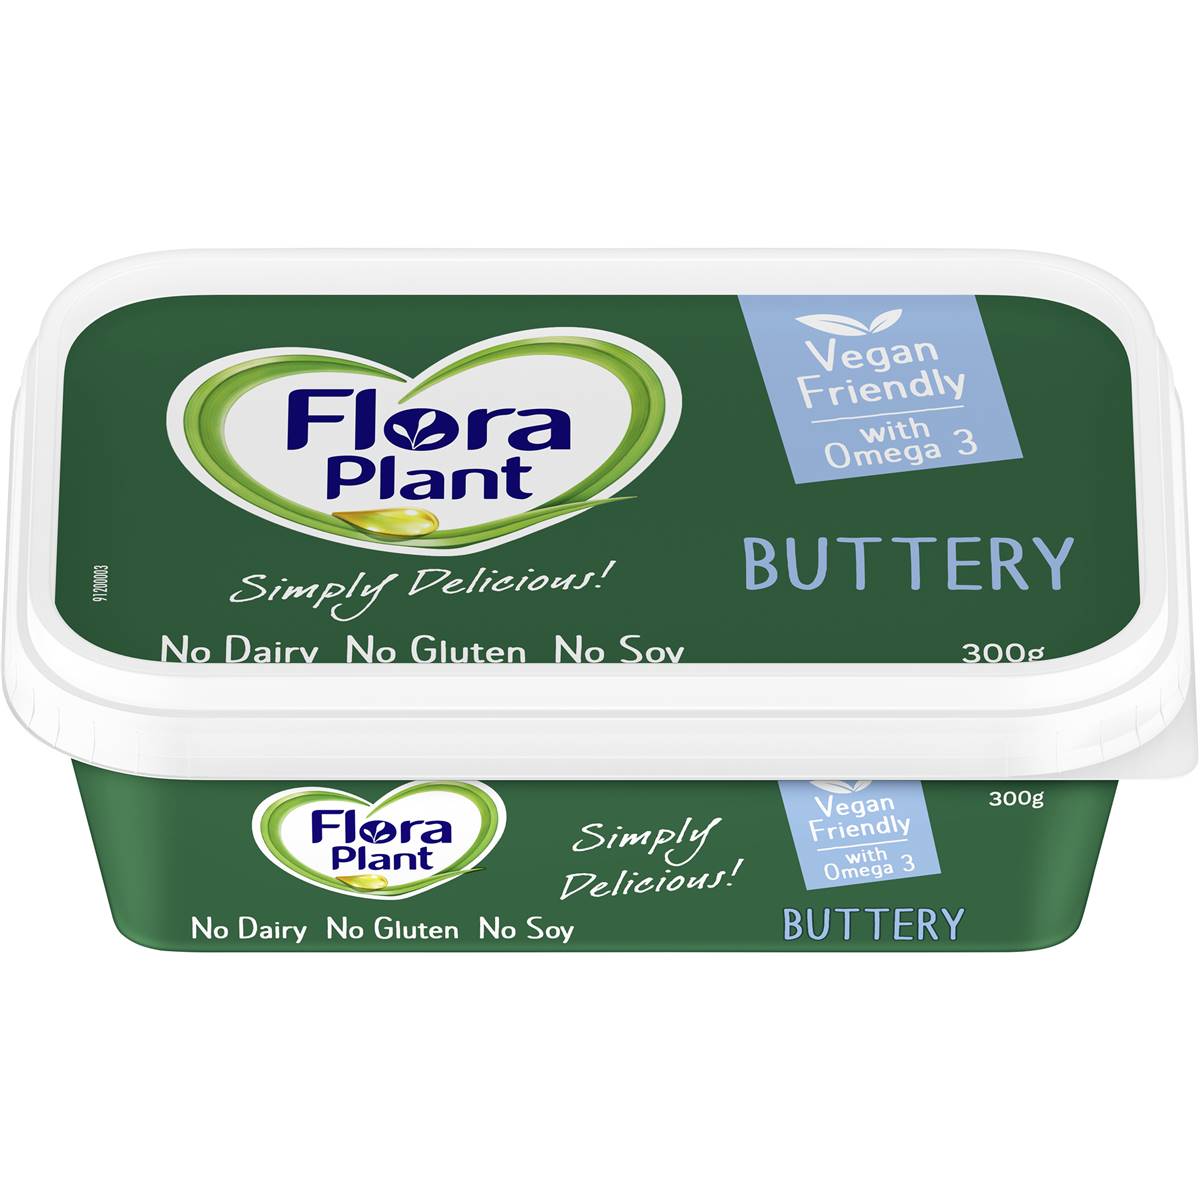 Calories in Flora Plant Dairy Free Buttery